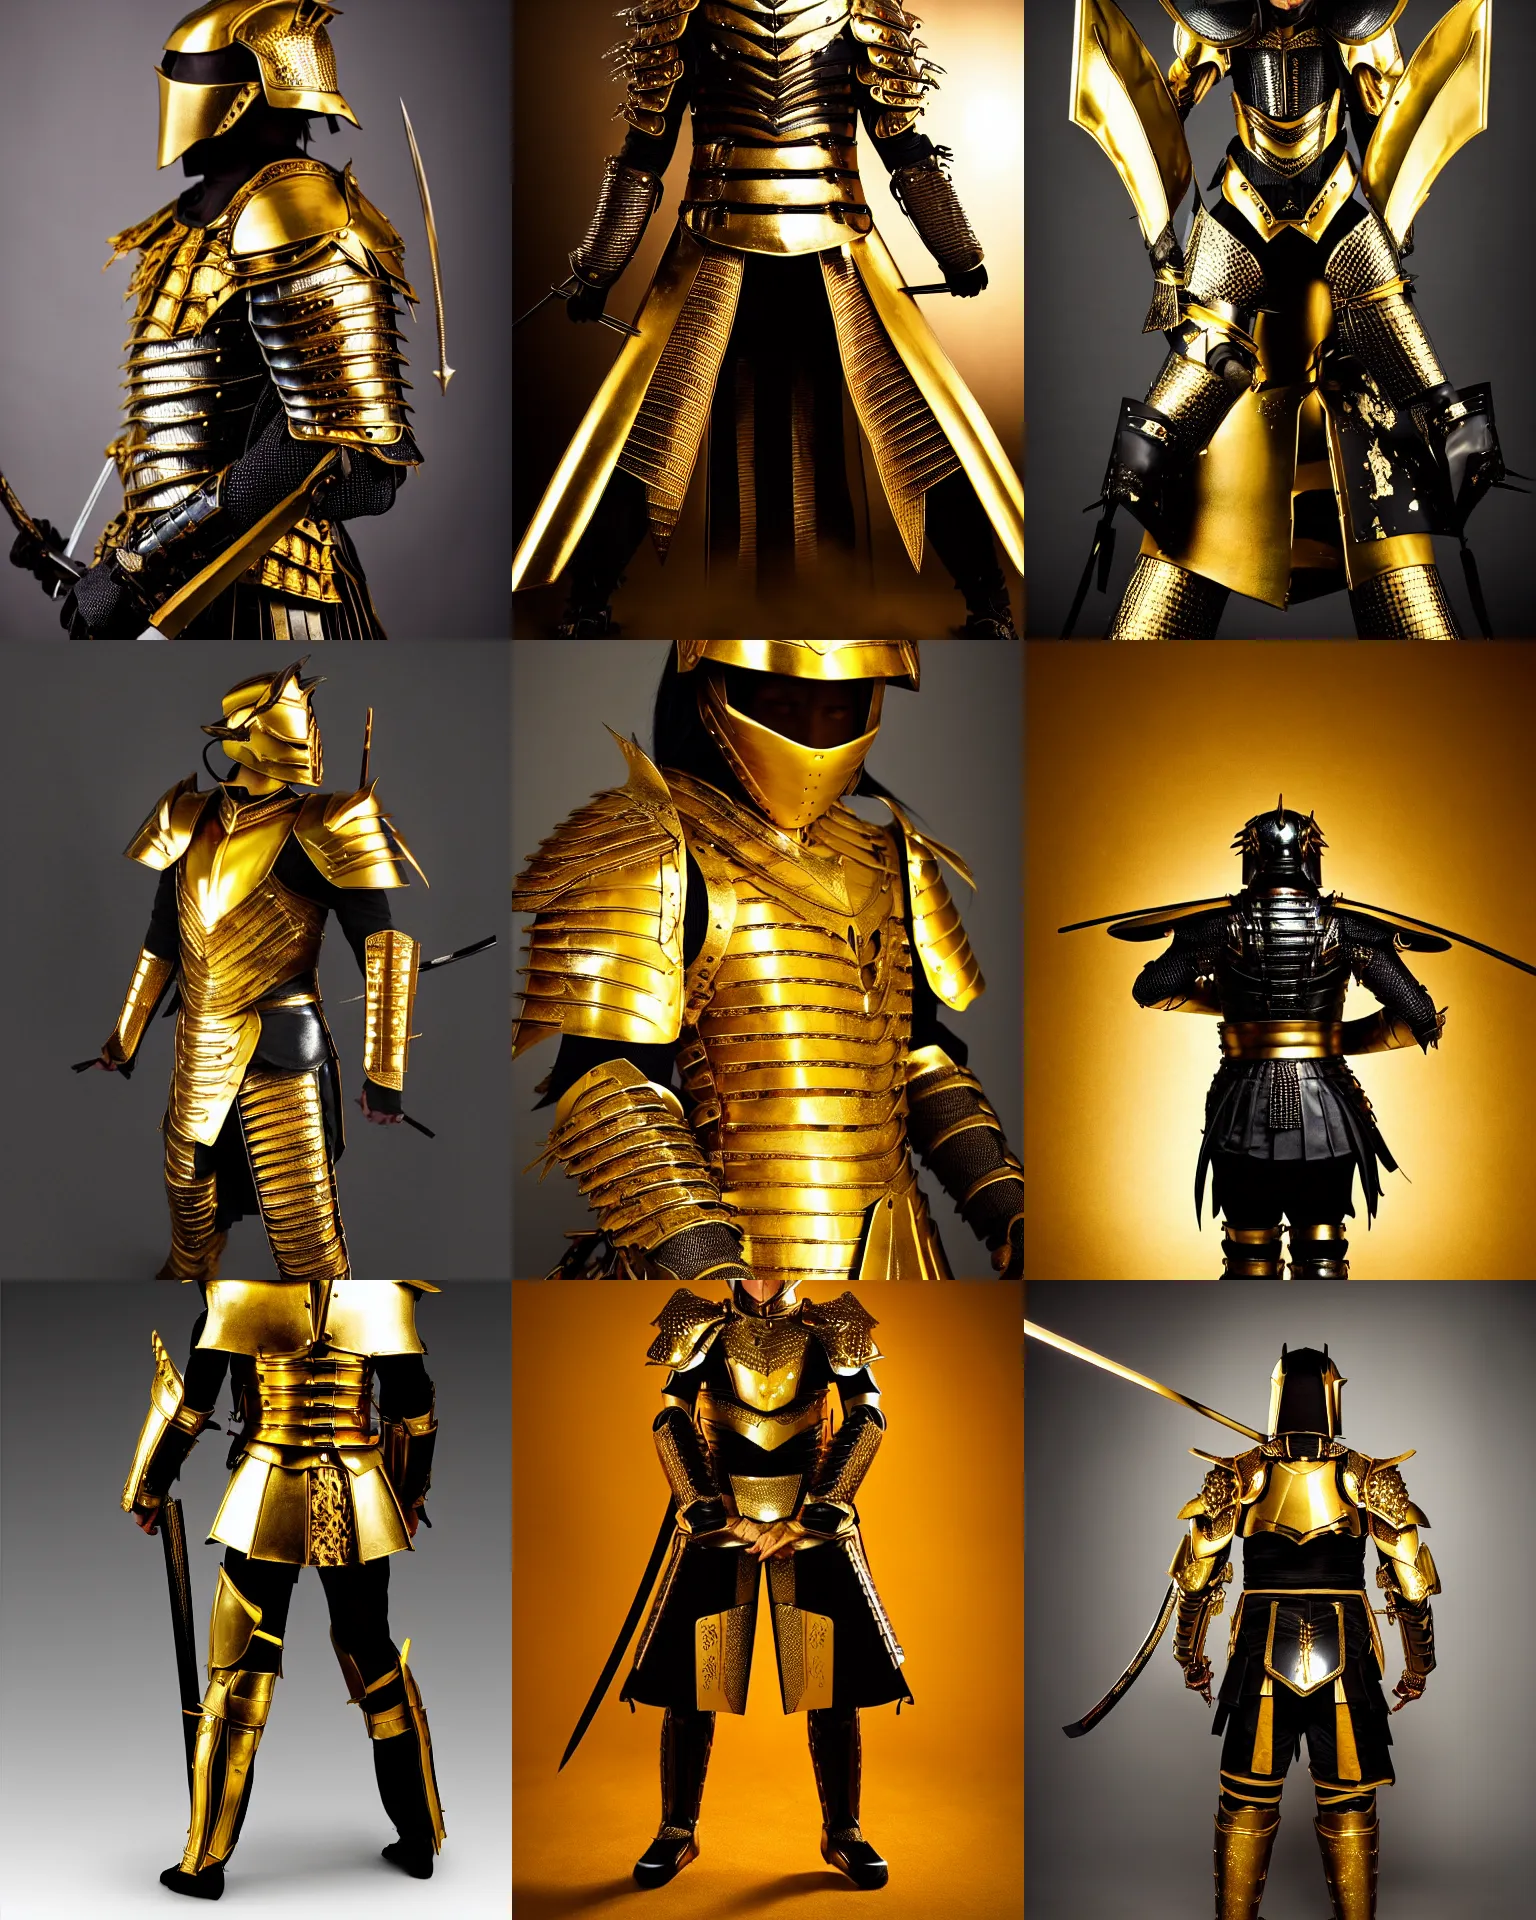 Prompt: !dream a studio photography of samourai wearing gold and black armor, dramatic backlighting,